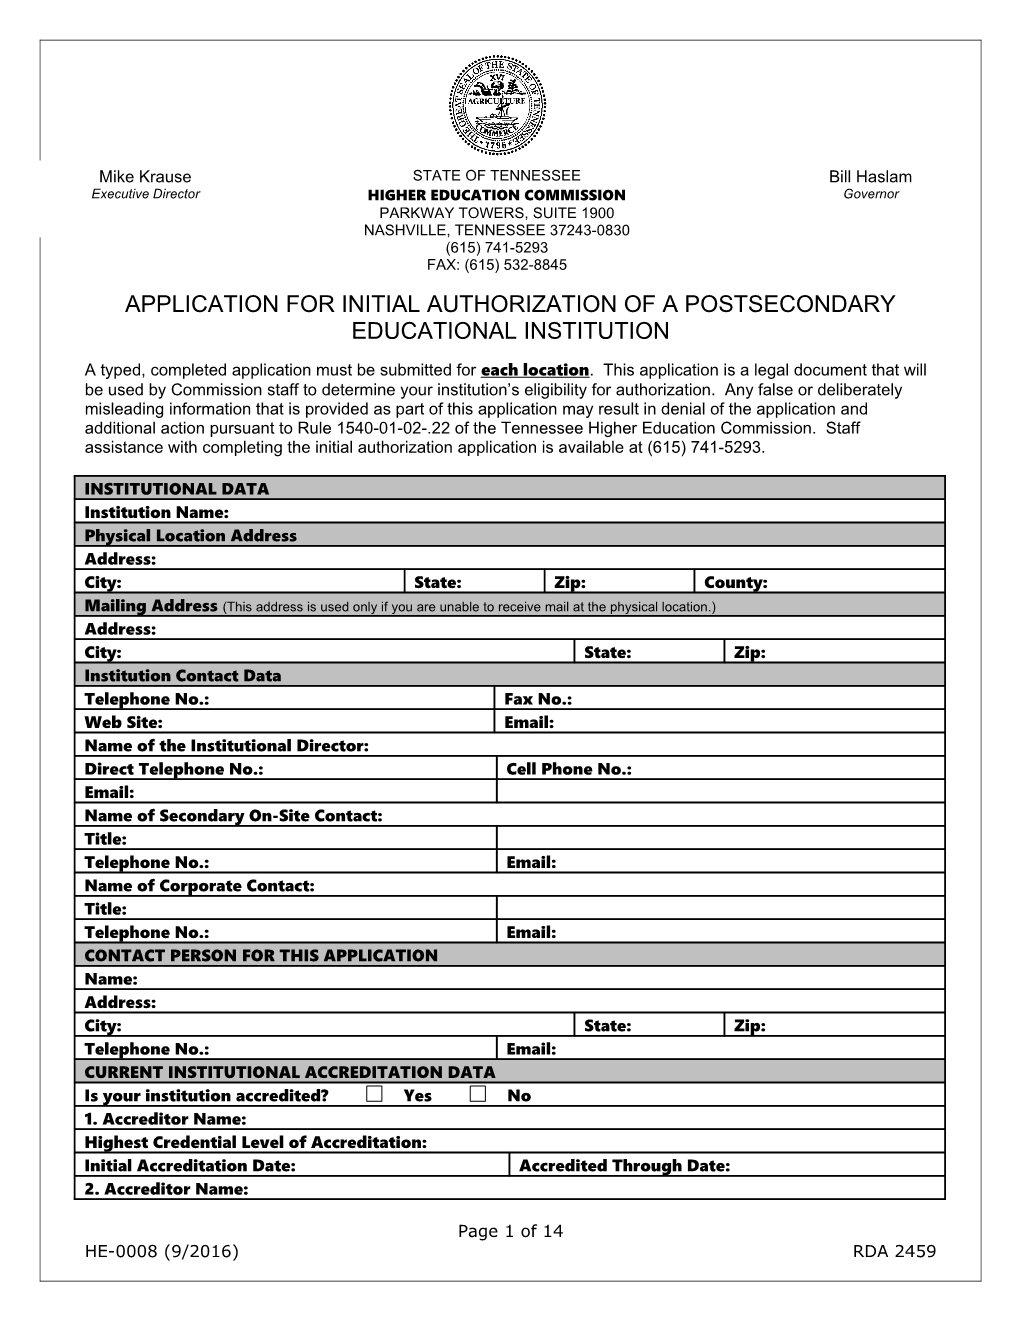 Application for Initial Authorizationof a Postsecondary Educational Institution